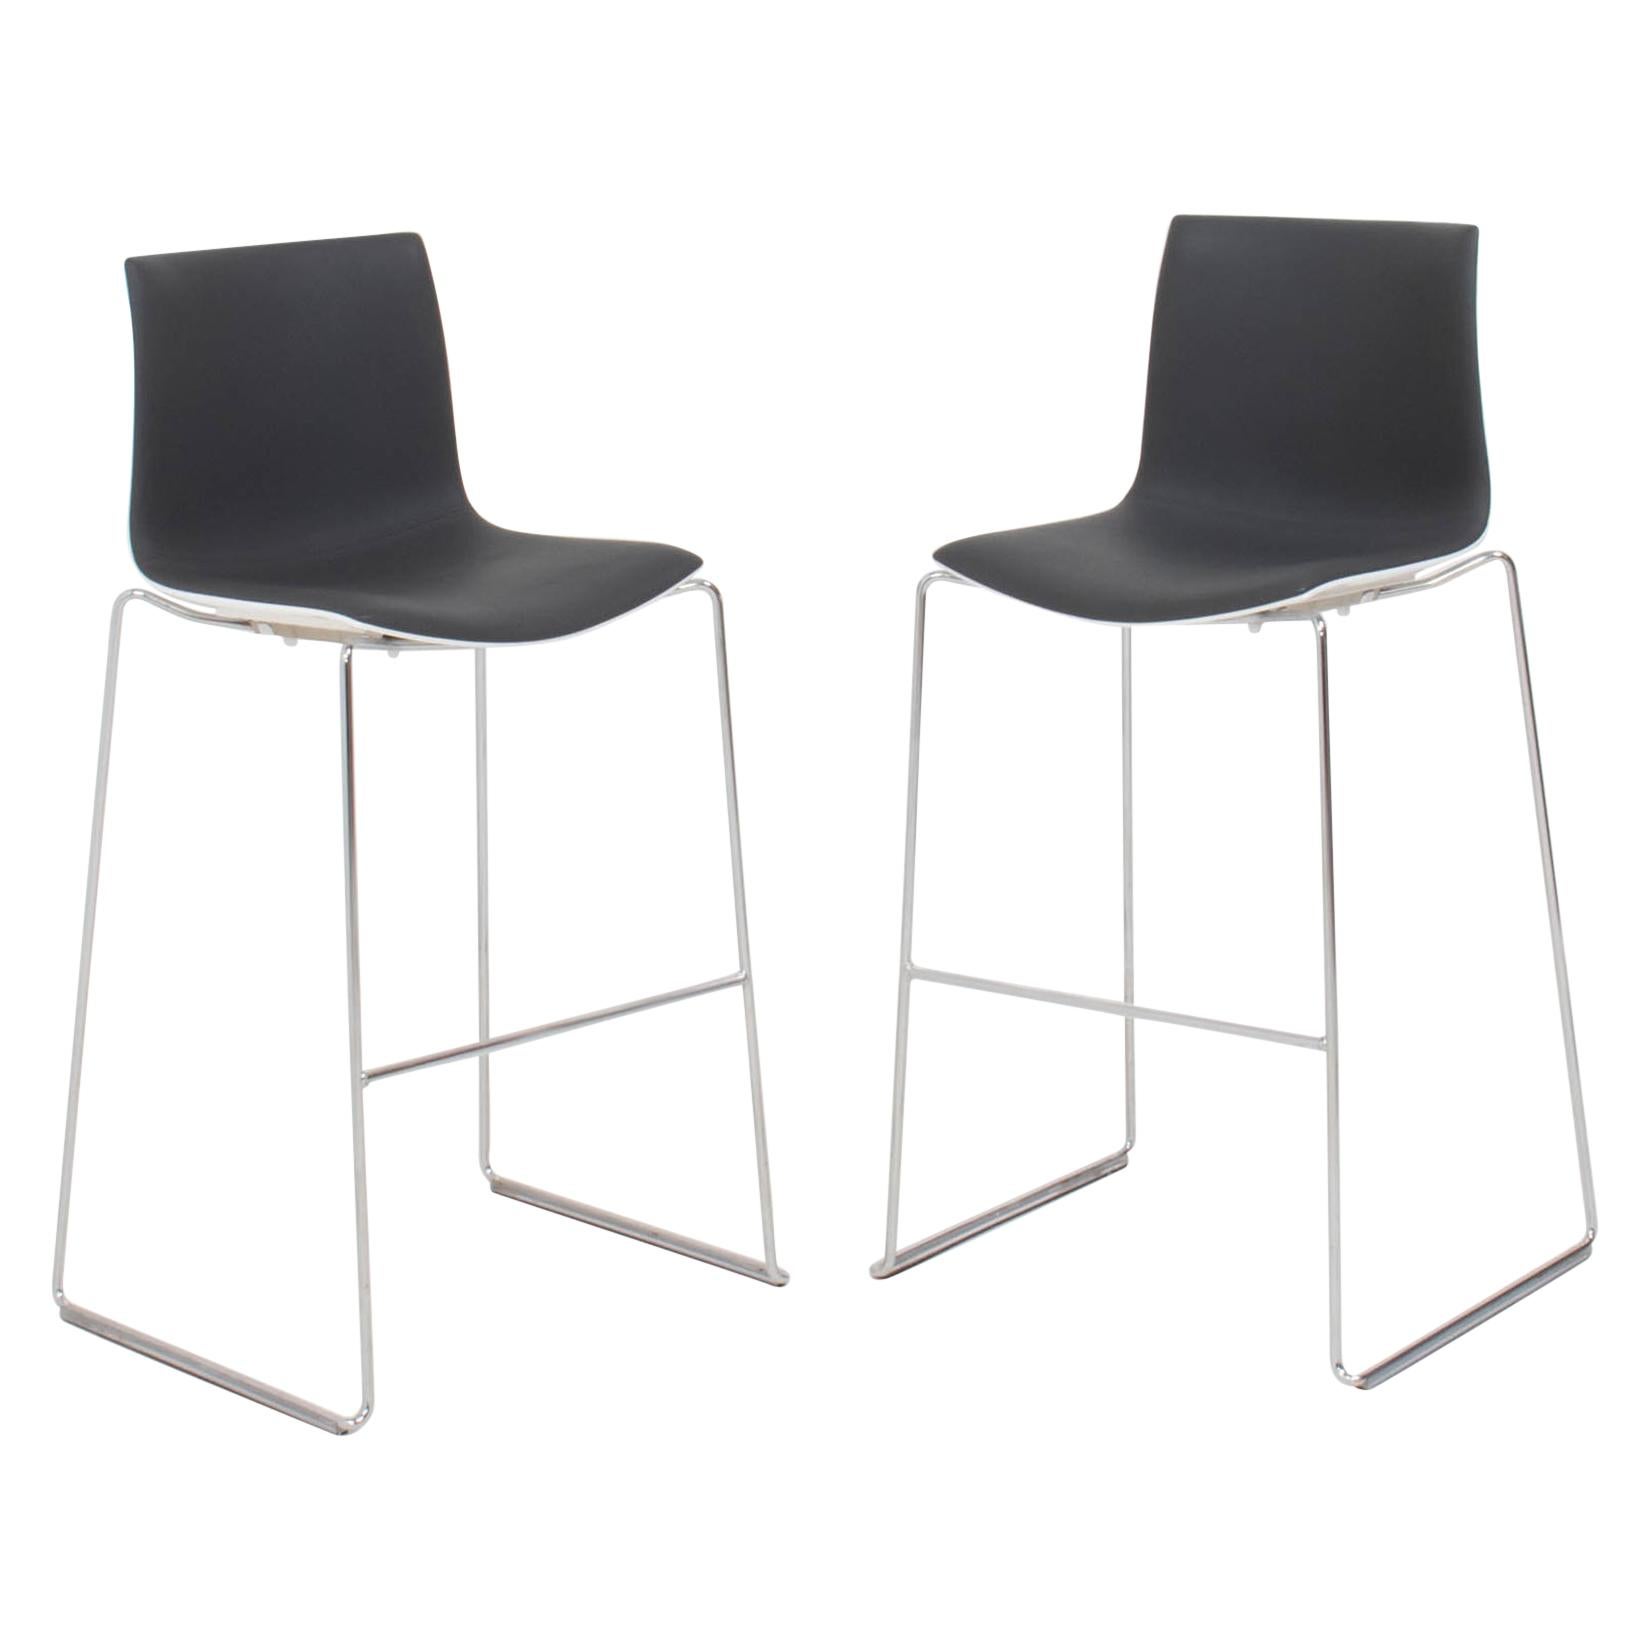 Arper by Antti Kotilainen Aava Grey and White Bar Stools, Set of 2, 2013